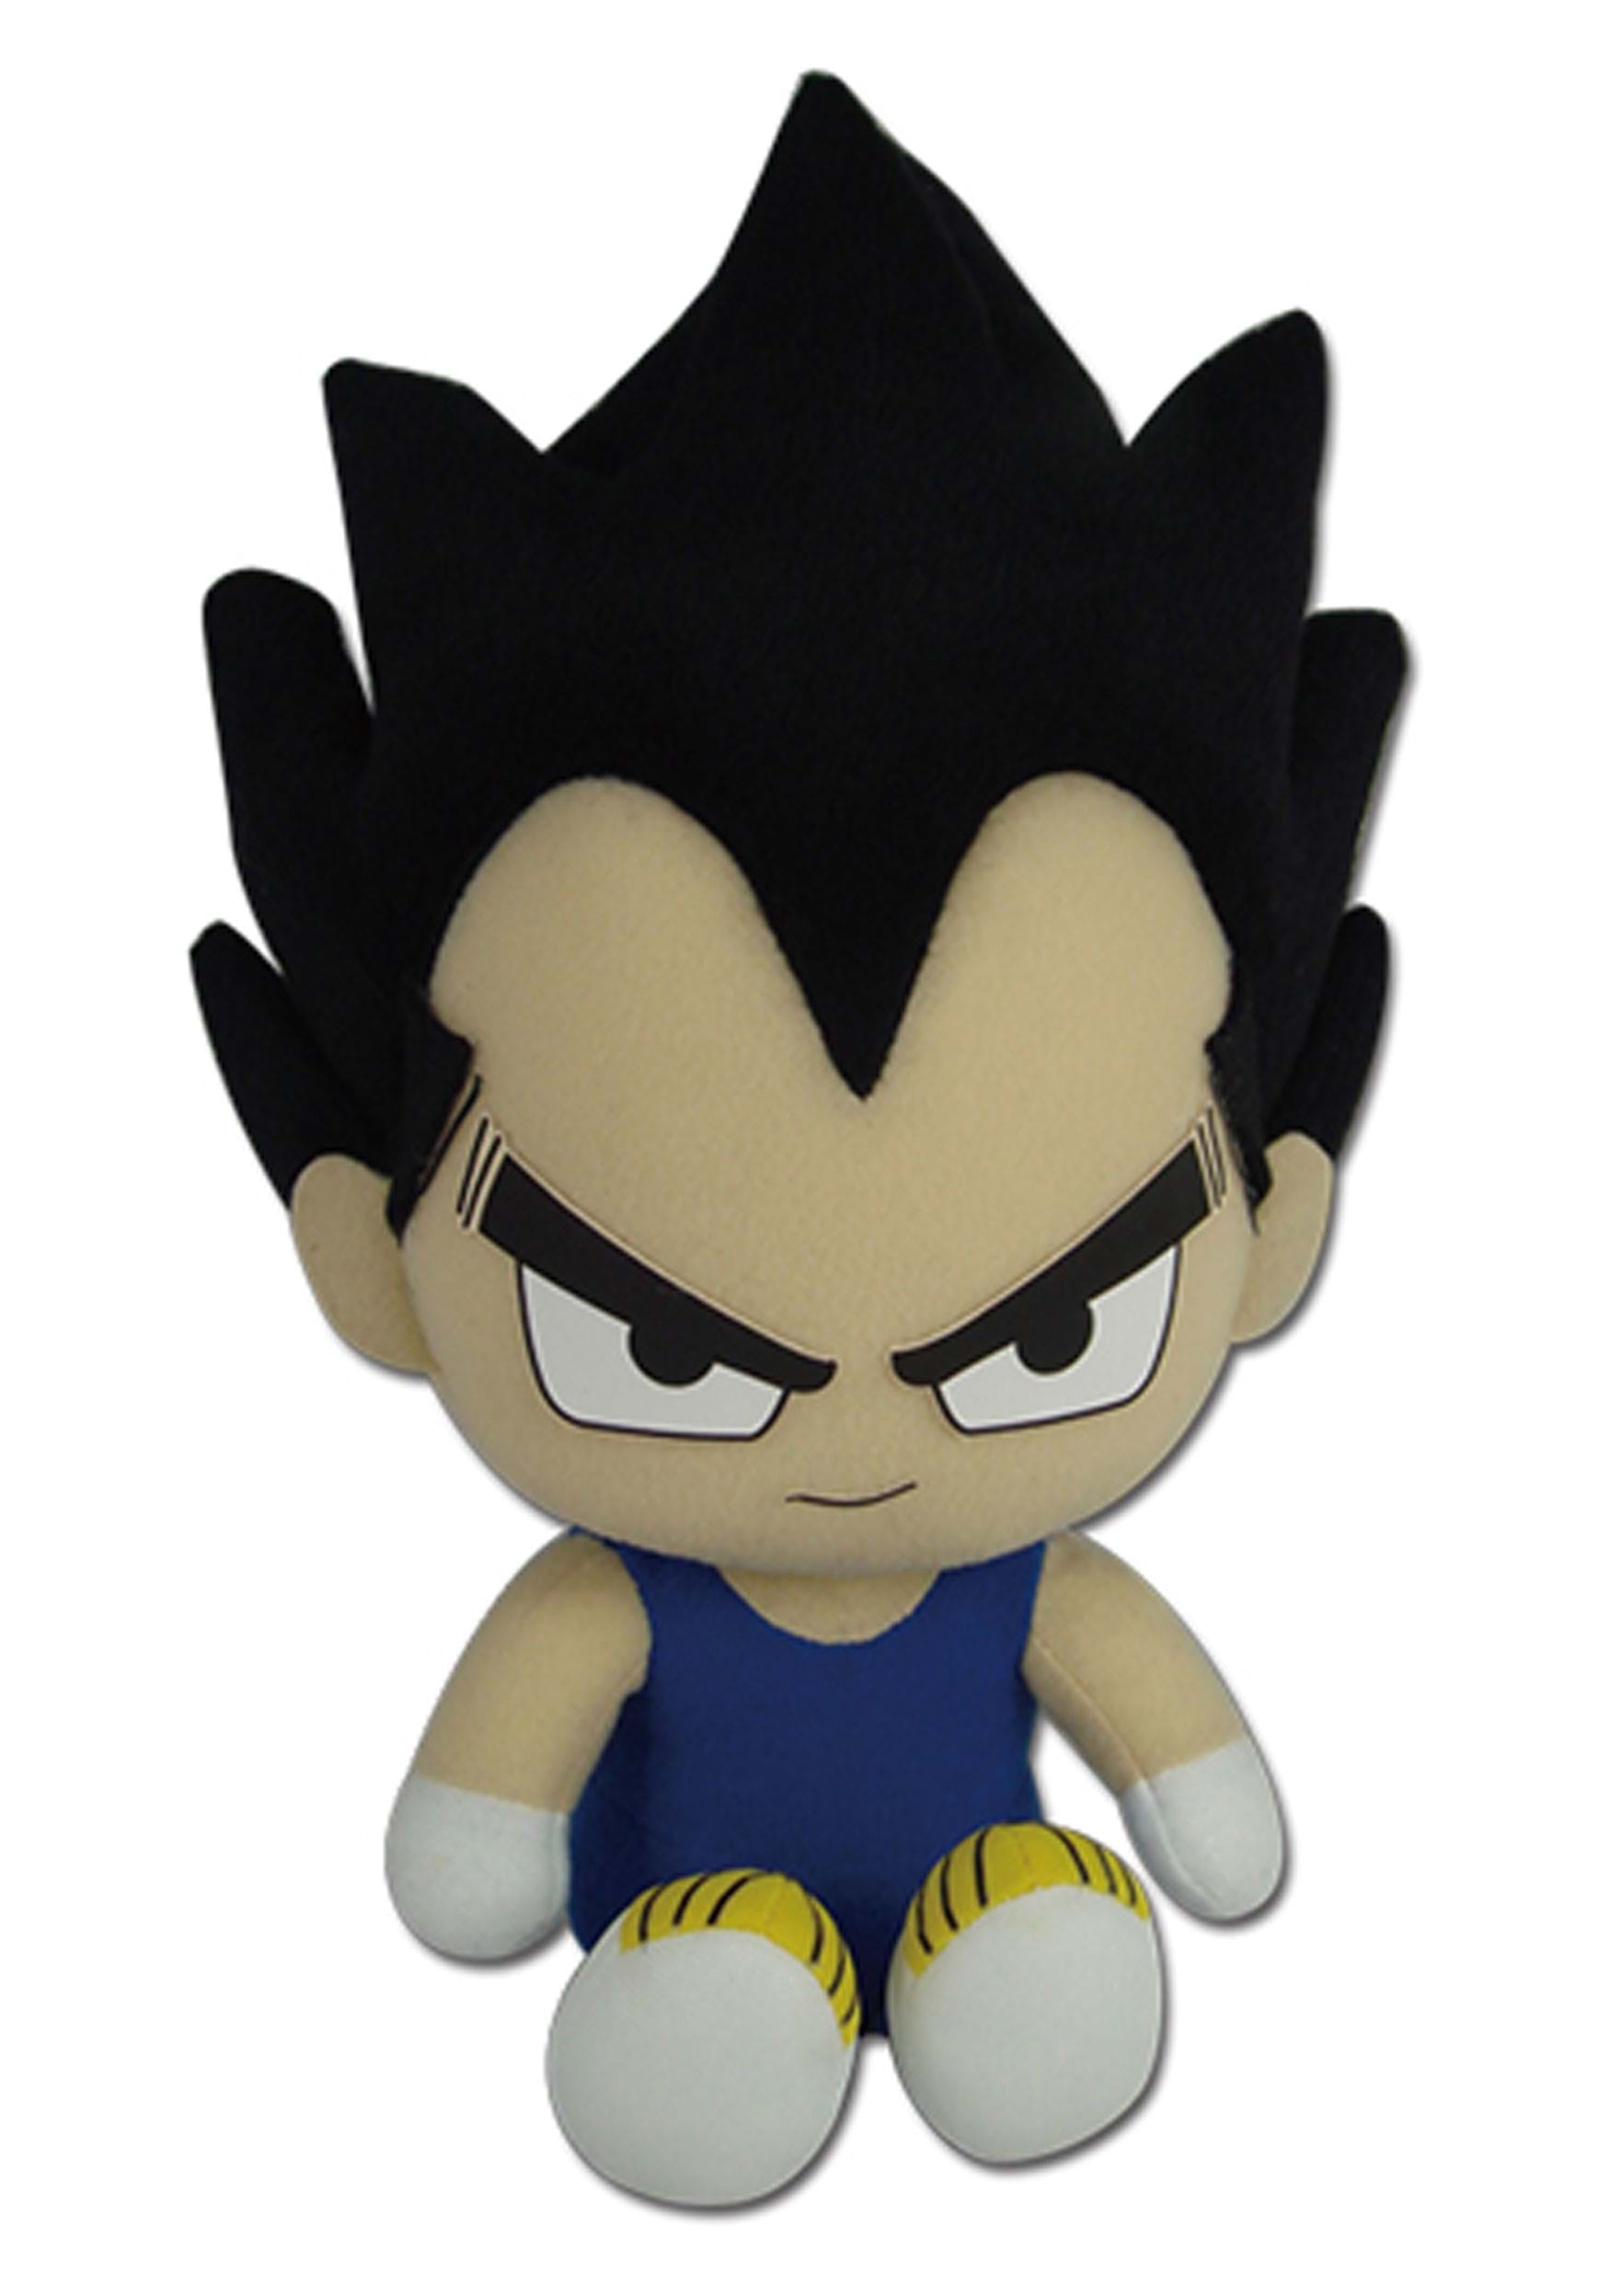 That Was The Look And Pose Of A Superhero To Me - Gohan In Dragon Ball Z -  560x1328 PNG Download - PNGkit